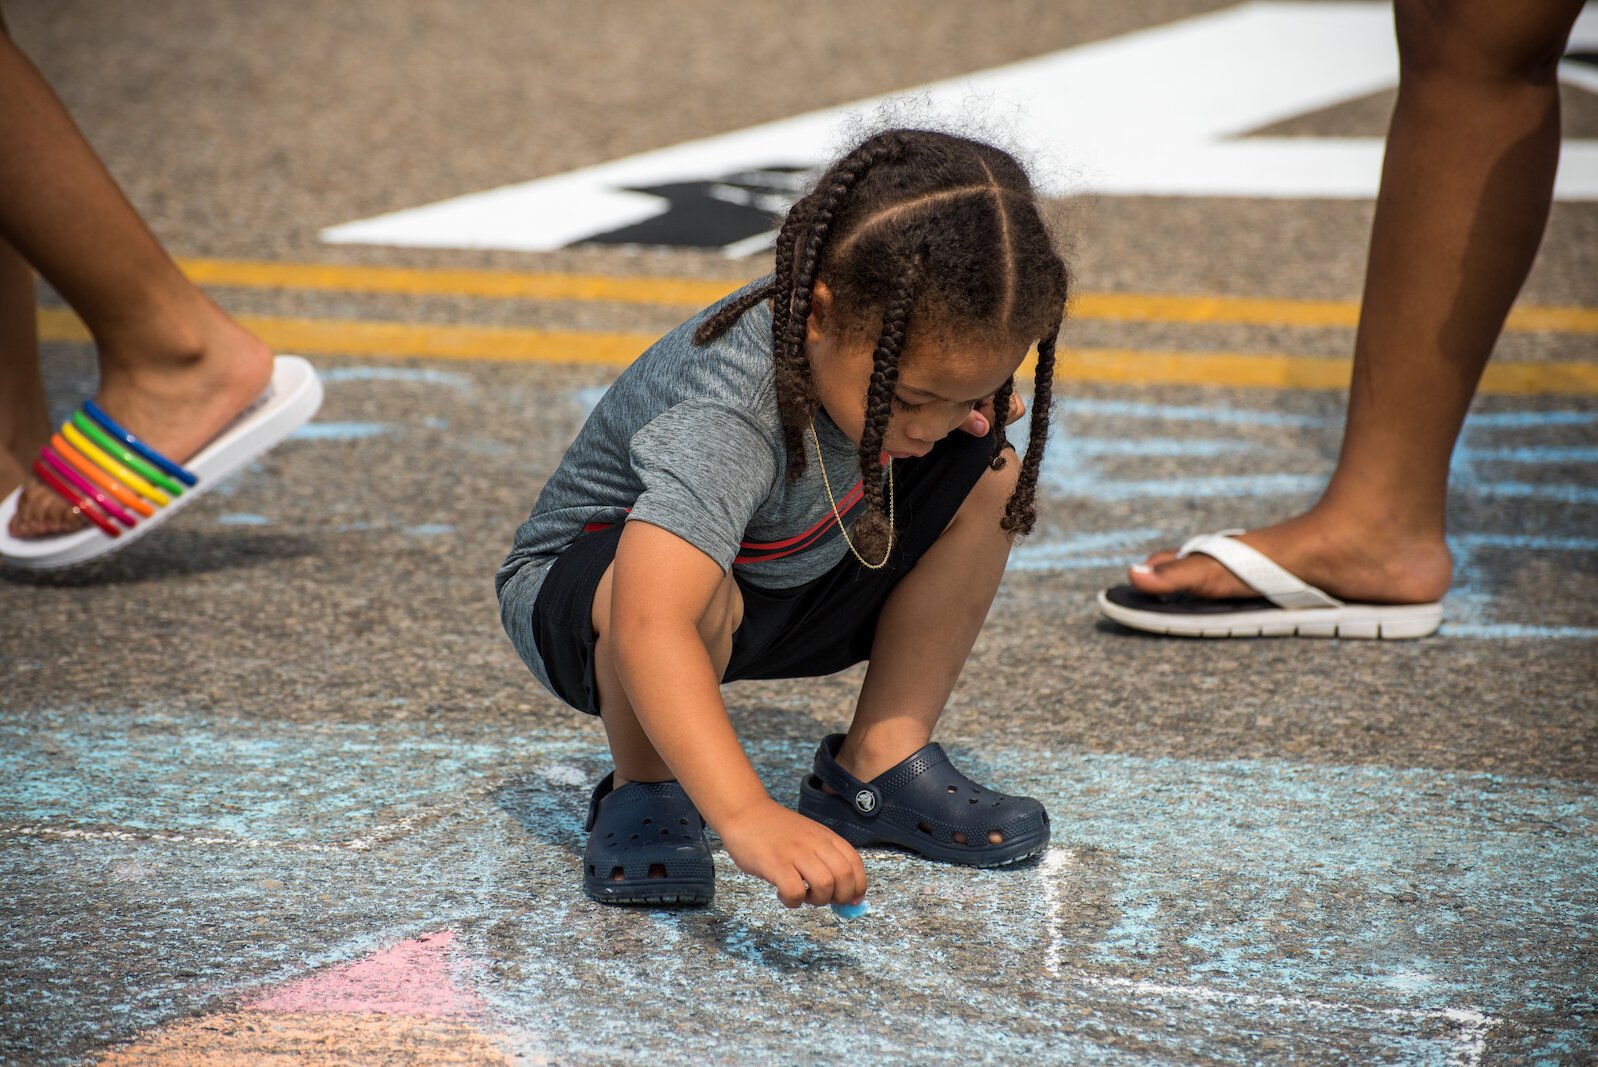 Chalk was the preferred medium for some young artists at the creation of the Black Lives Matter mural on Rose Street, between Lovell and South streets  on Friday afternoon.